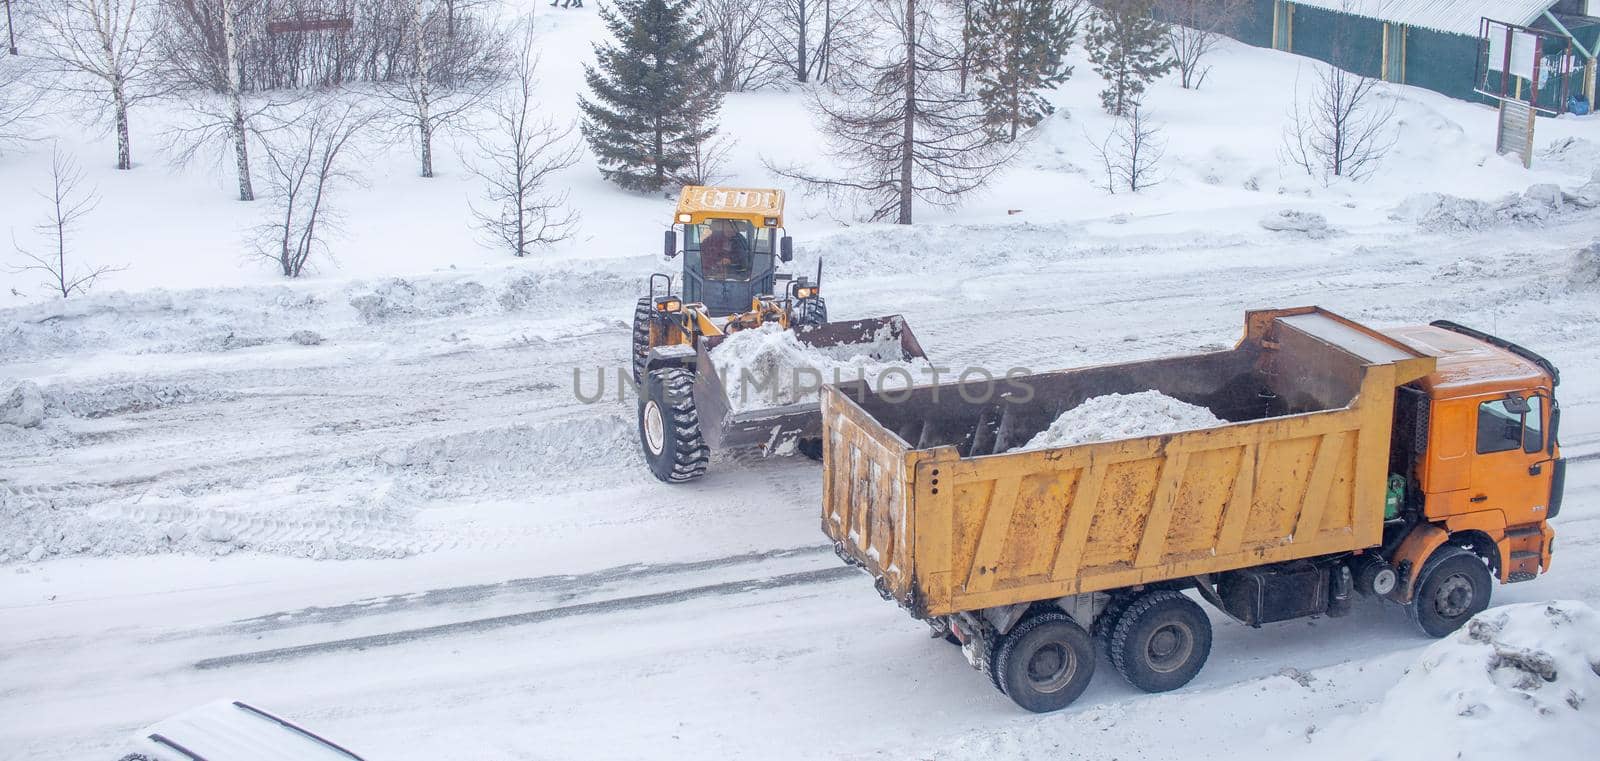 Cleaning and cleaning of roads in the city from snow in winter by AnatoliiFoto